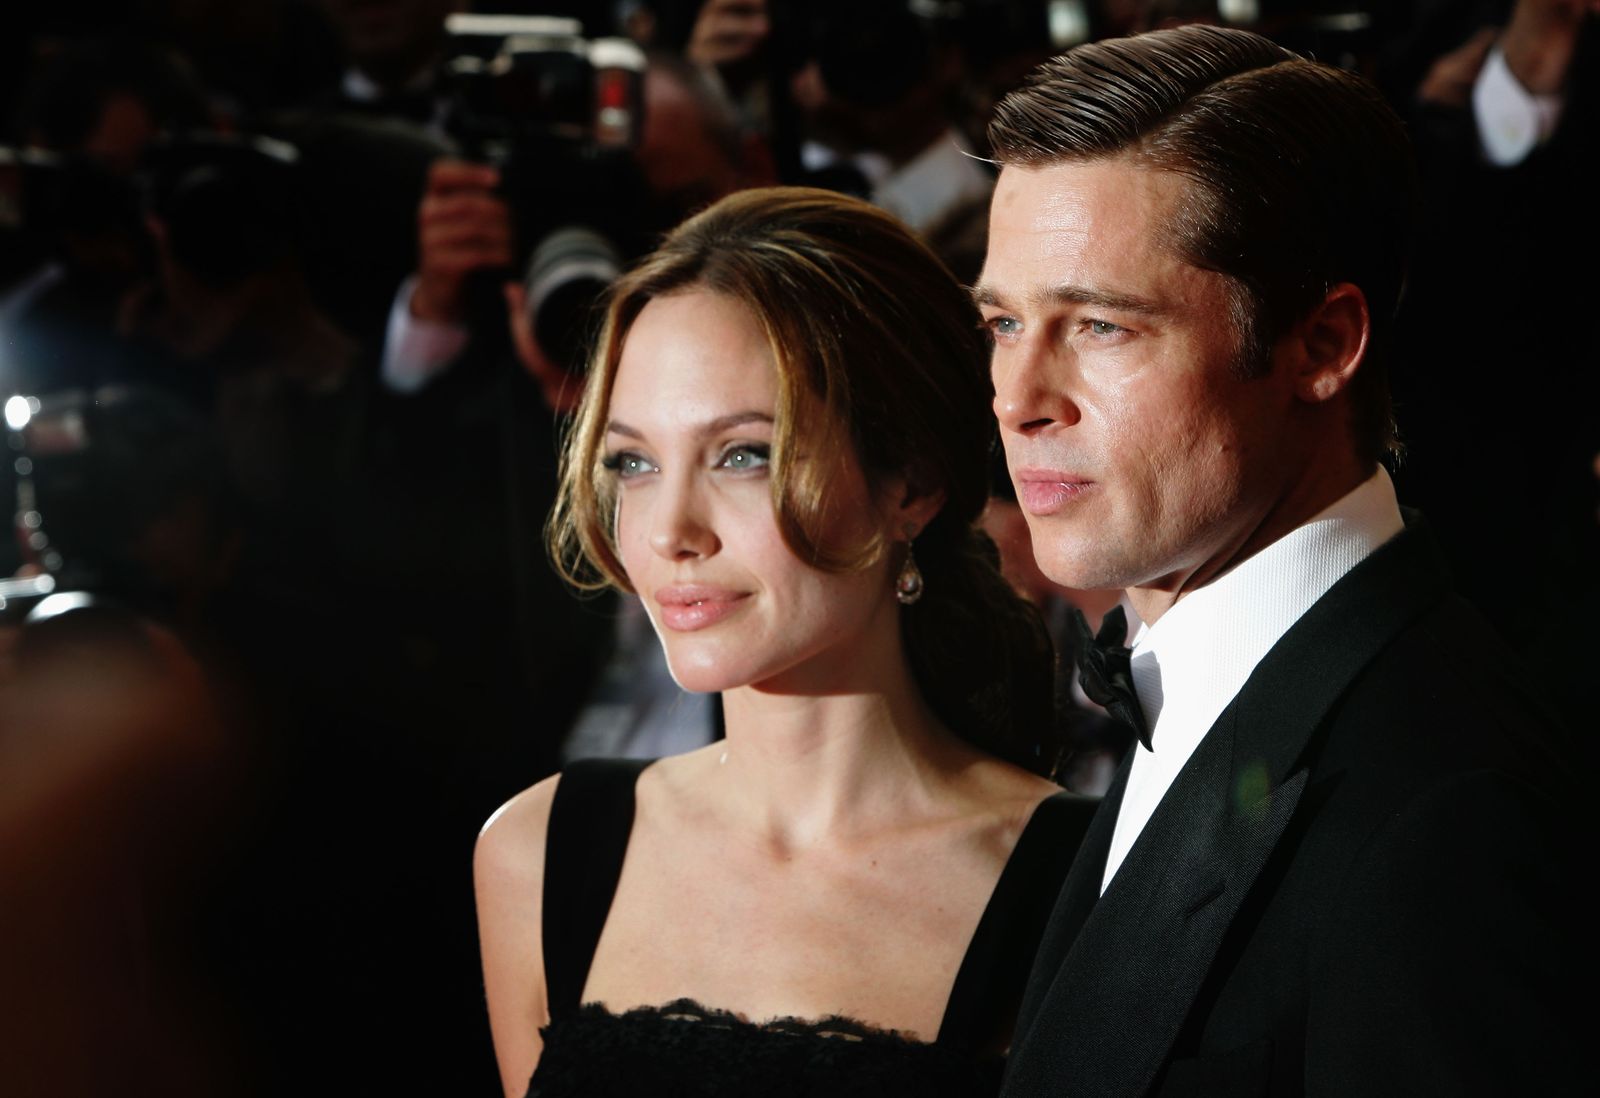 Brad Pitt and Angelina Jolie at the premiere of "A Mighty Heart" during the 60th International Cannes Film Festival on May 21, 2007 in Cannes, France. | Photo: Getty Images